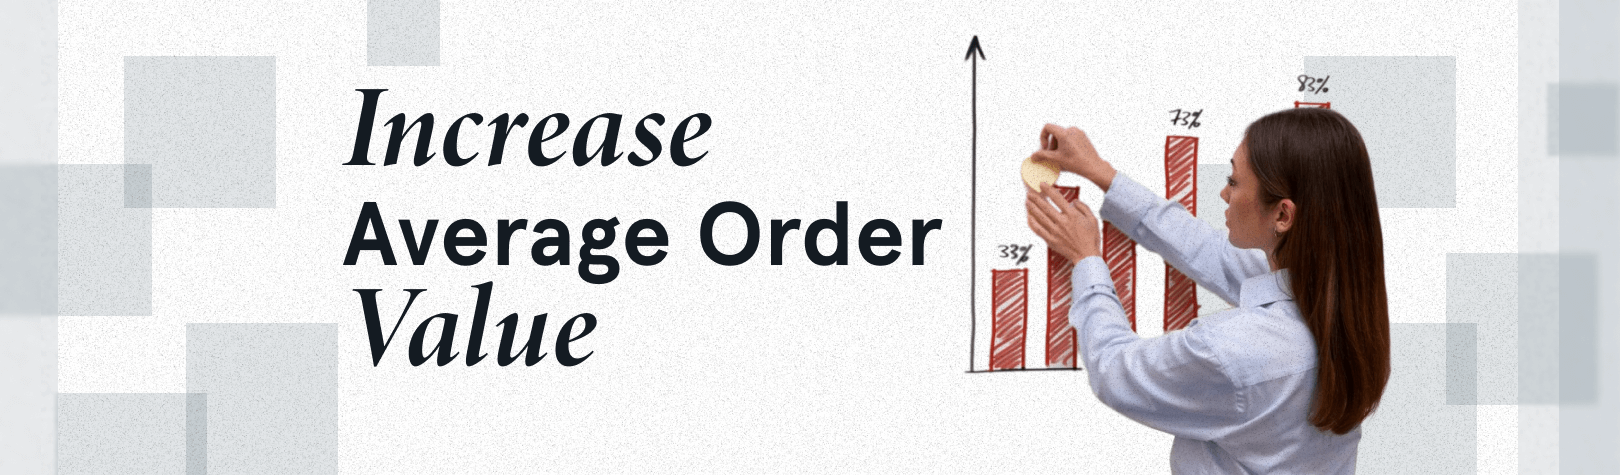 How To Increase Average Order Value_ 10 Proven Ways